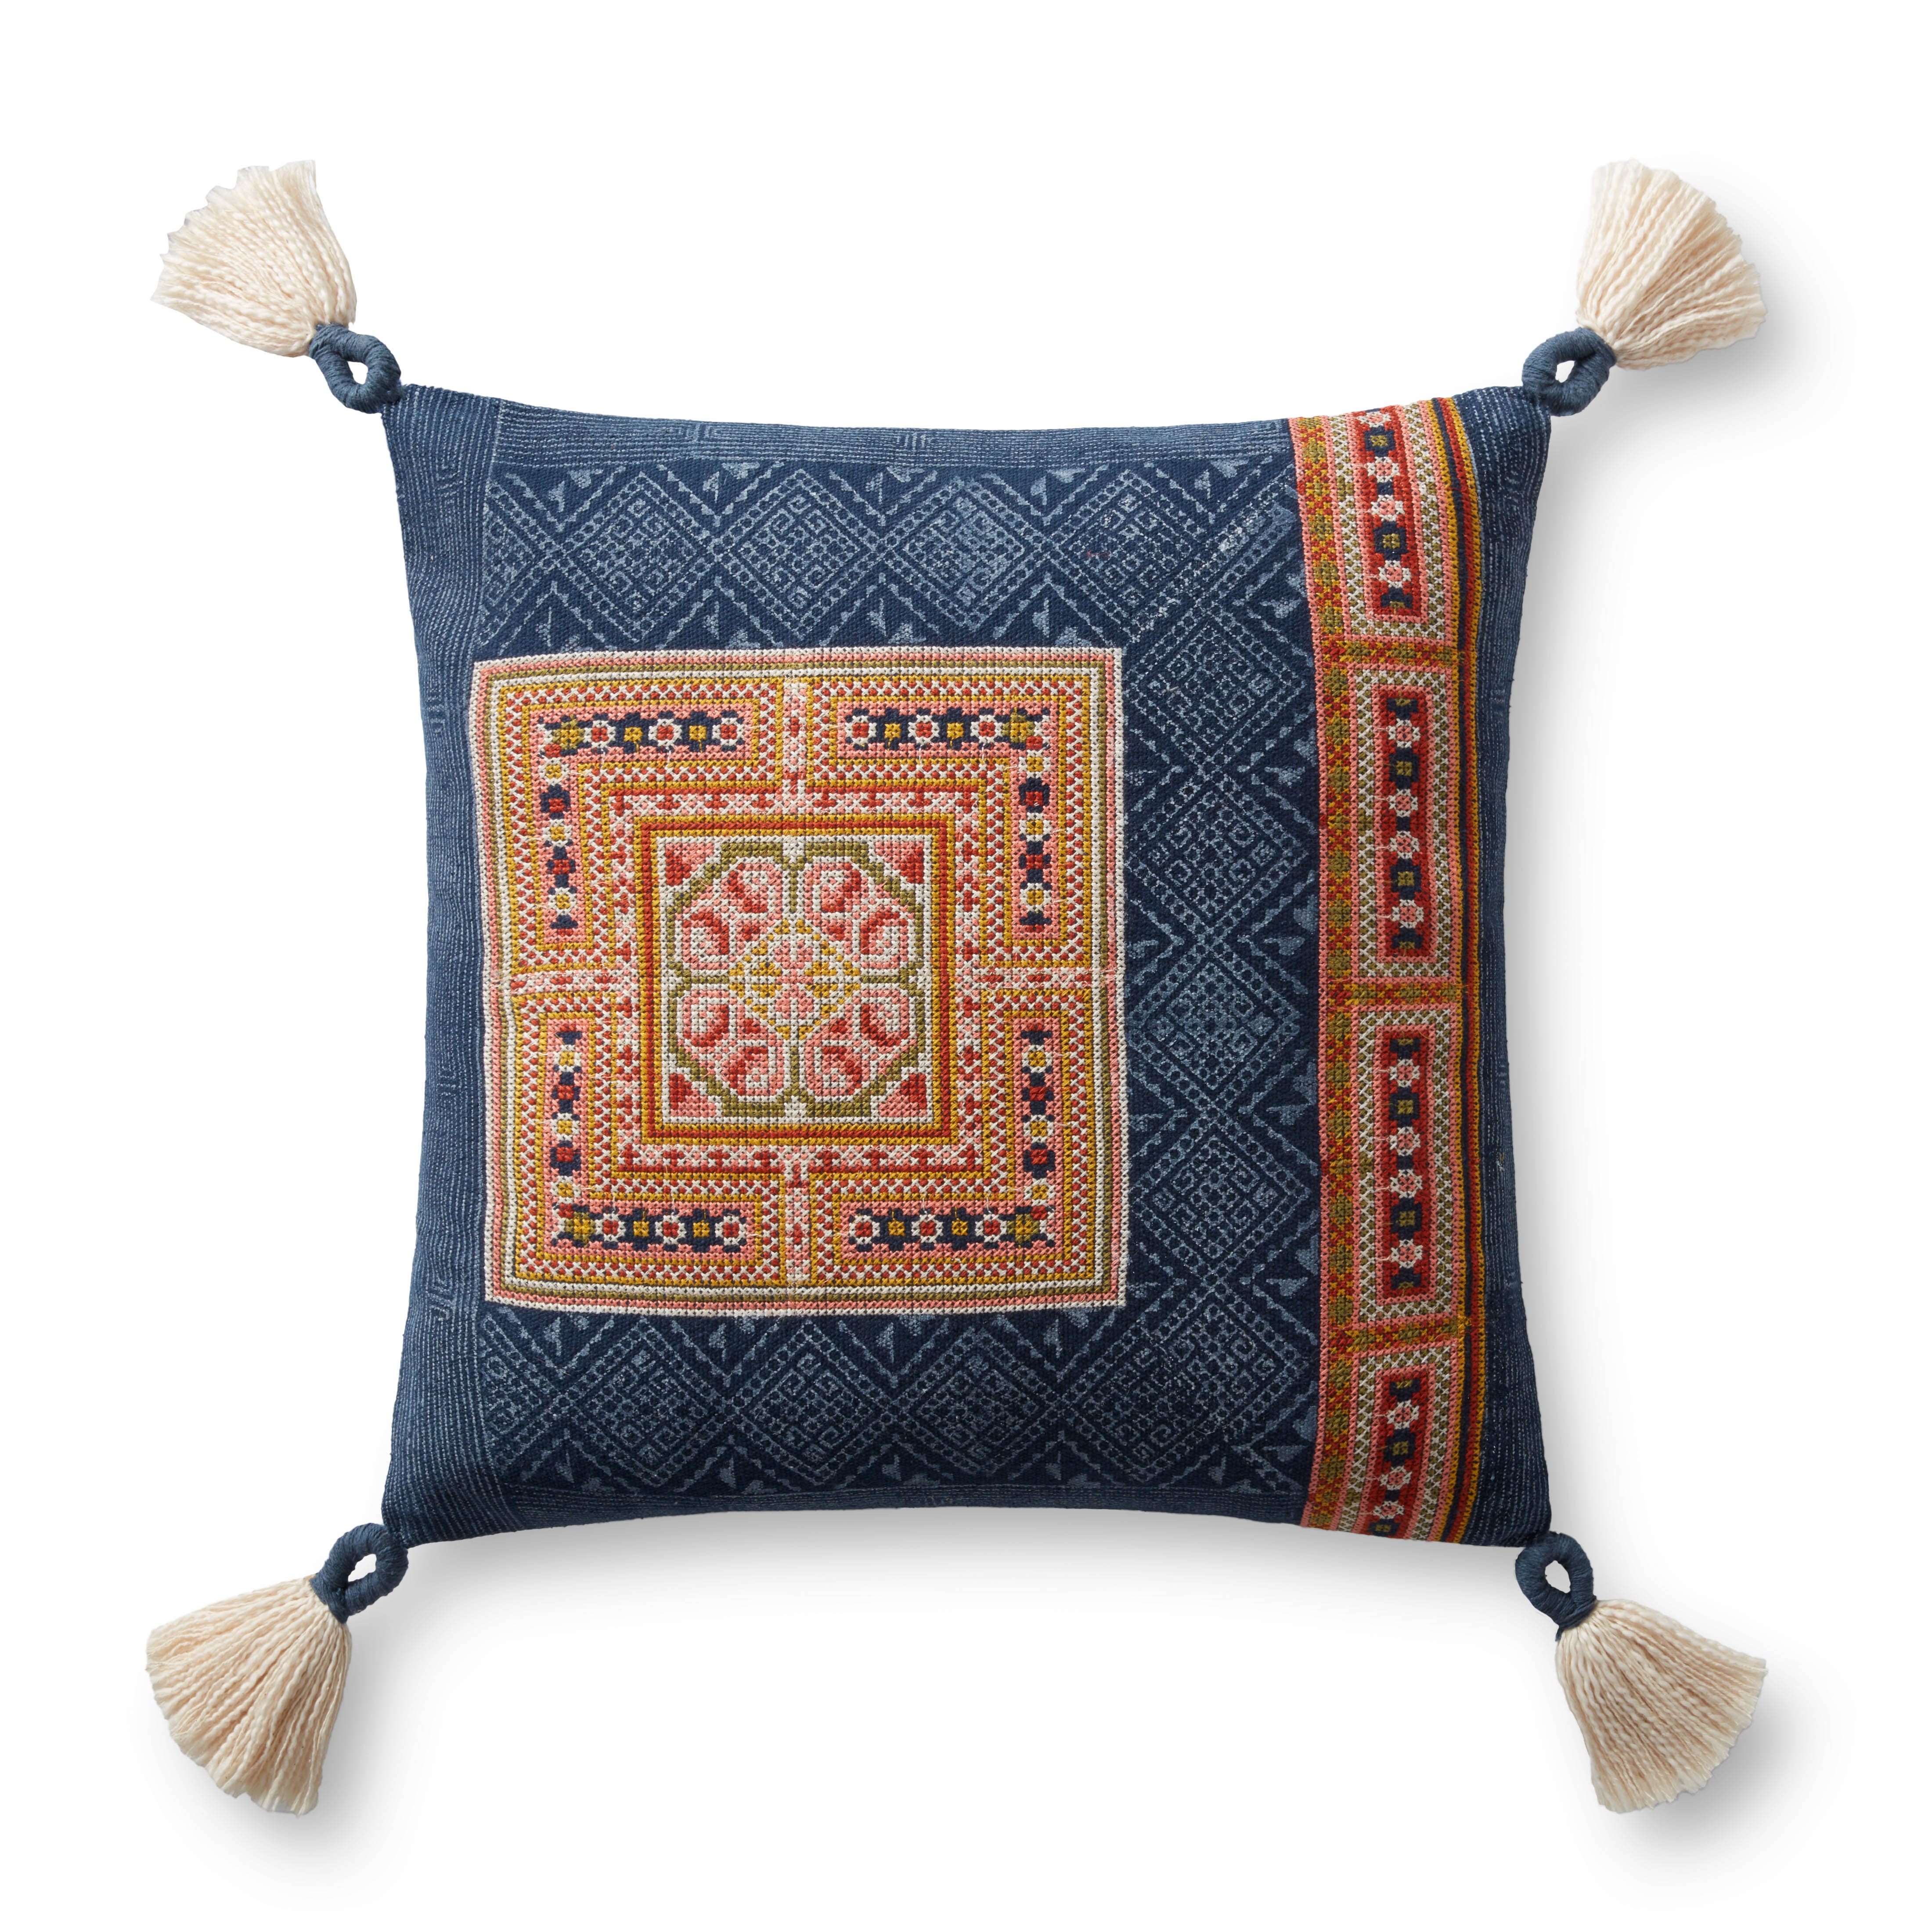 PILLOWS P0968 NAVY / MULTI 18" x 18" Cover Only - Image 0